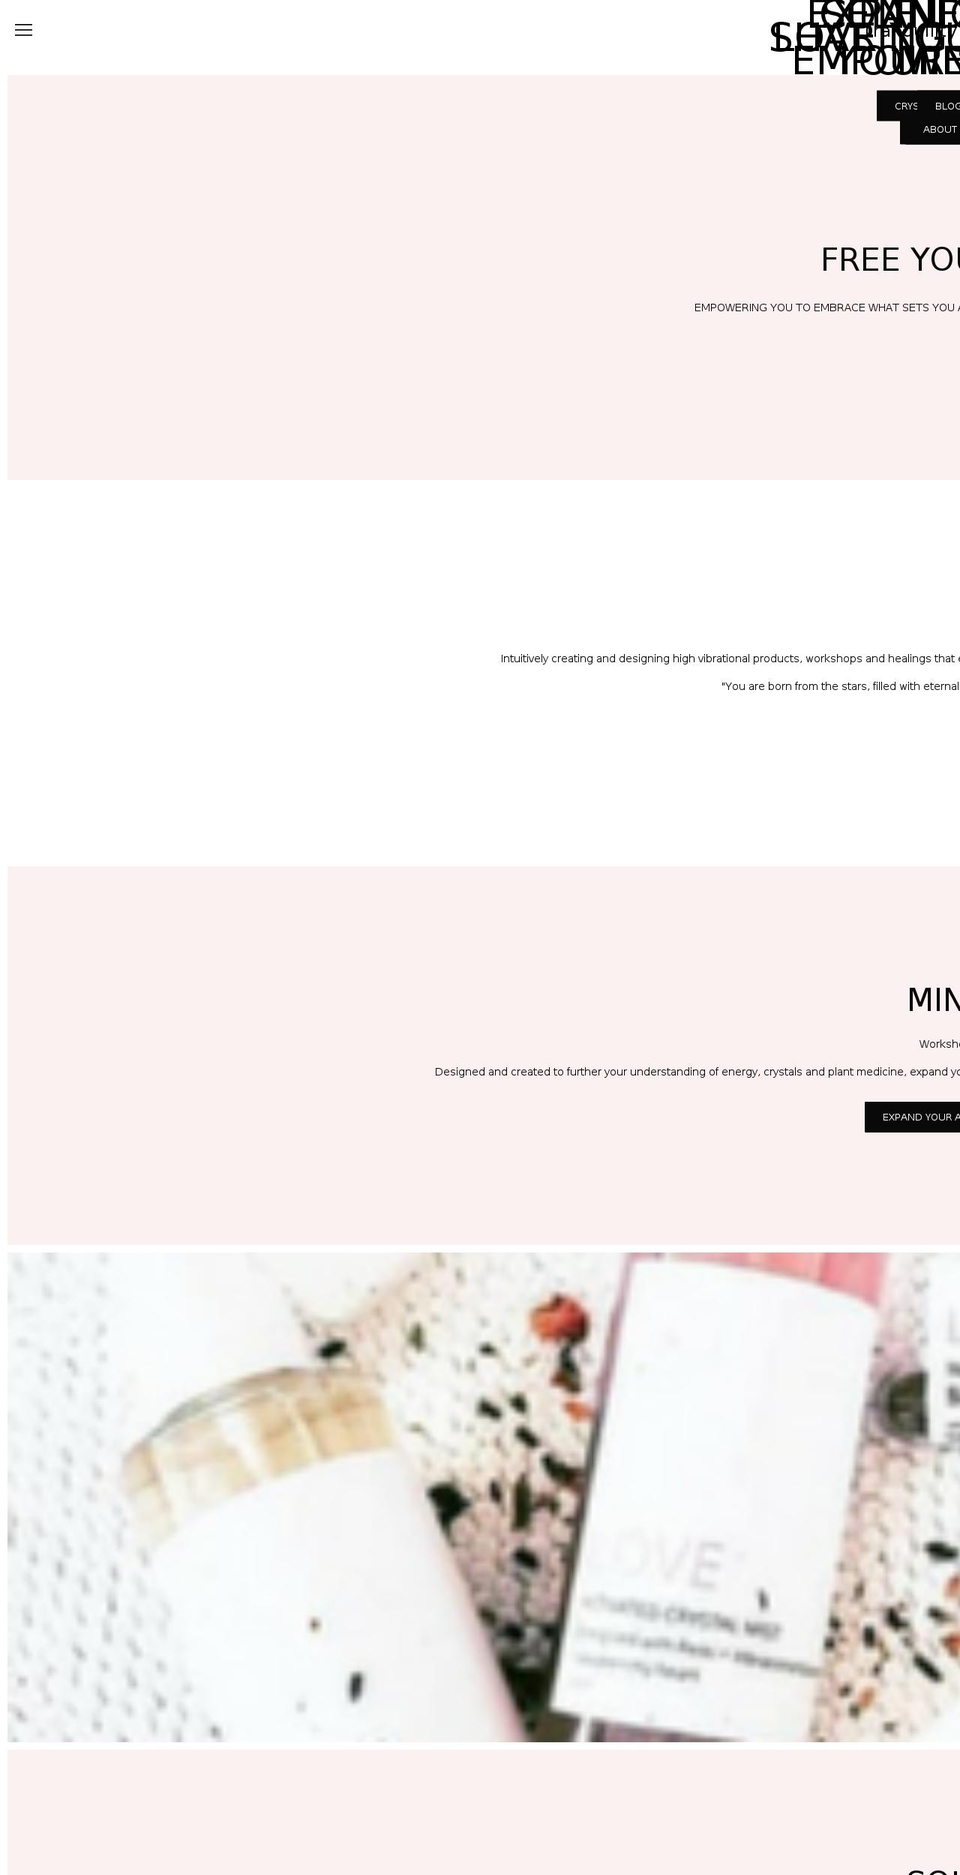 Vogue Shopify theme site example tranquilitycrystals.com